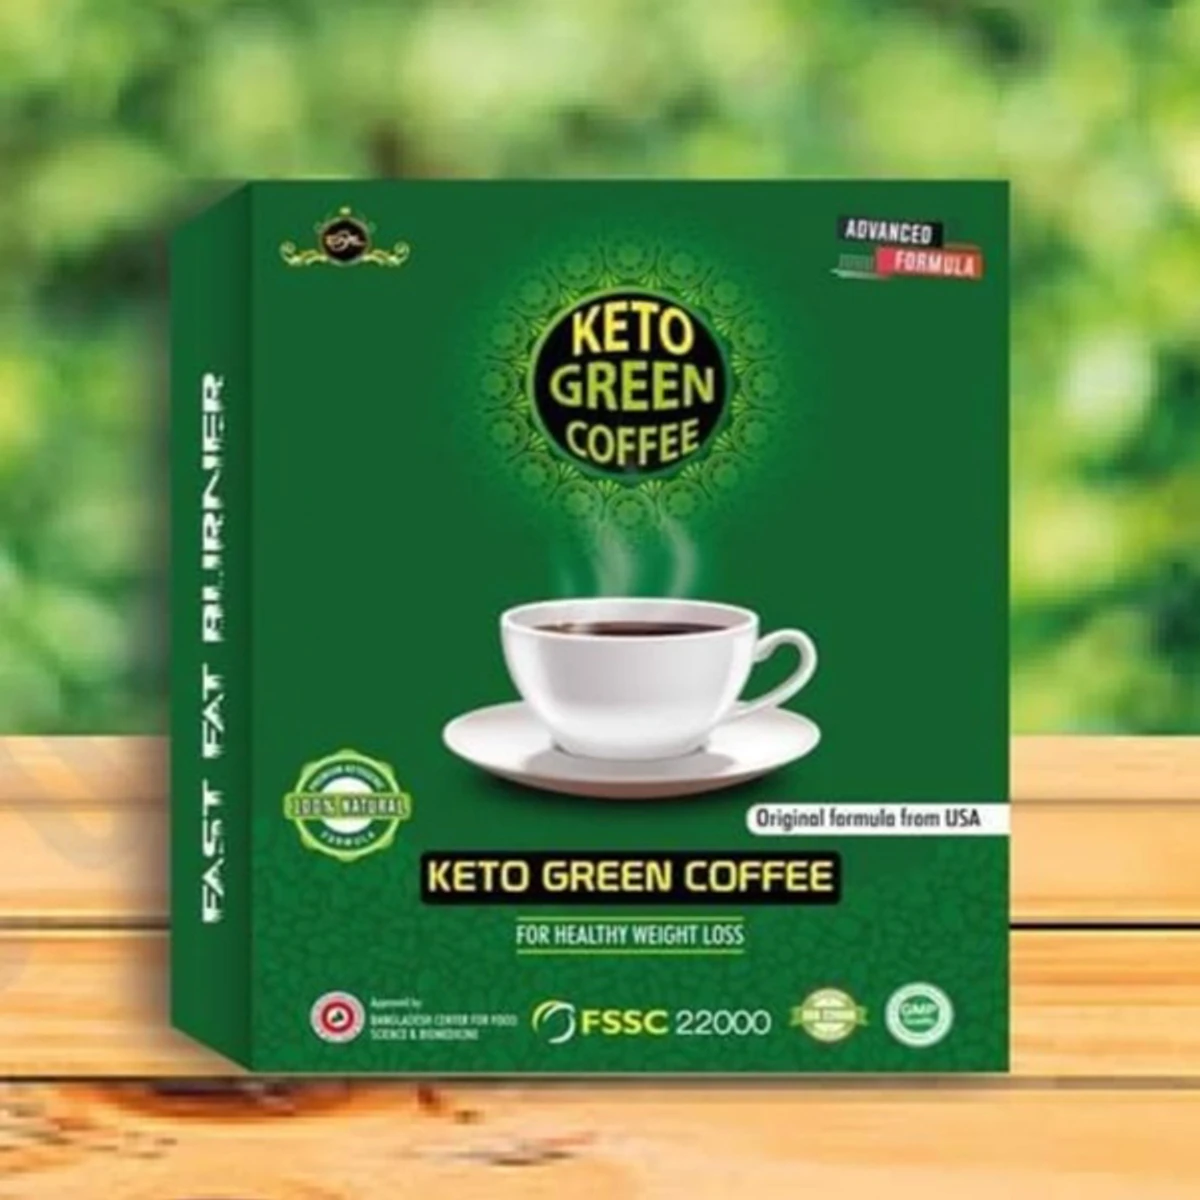 keto green coffee for healthy weight loss